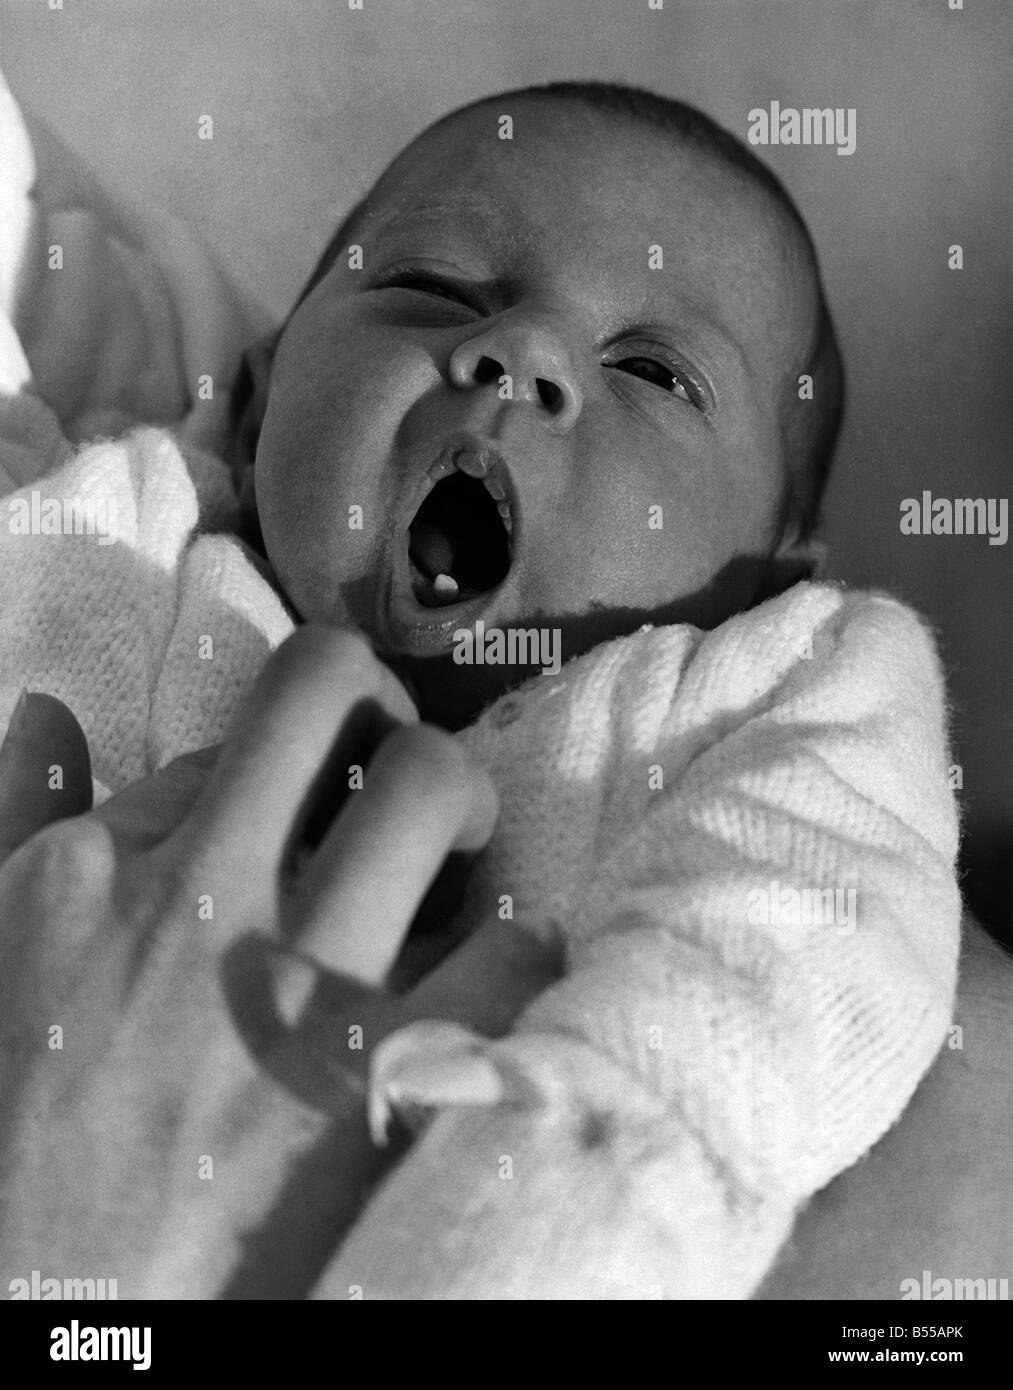 Tanya, the baby who came complete with a first tooth. It is a big moment in any baby's life, the cutting of the first tooth. For by such milestones do parents chart their offspring's progress. You can understand, then , why Roger Fox and his wife Elizabeth feel specially proud of their first-born, Tanya, pictured here. when she was born three weeks ago - weighing 71b.20z. - her first tooth was already through. A real whopper, right in the front.putting her months ahead of her contemporaries. Foger, 24, a glass fibre operator, said Tanya amazed nurses at the maternity home in woking, Surrey Stock Photo